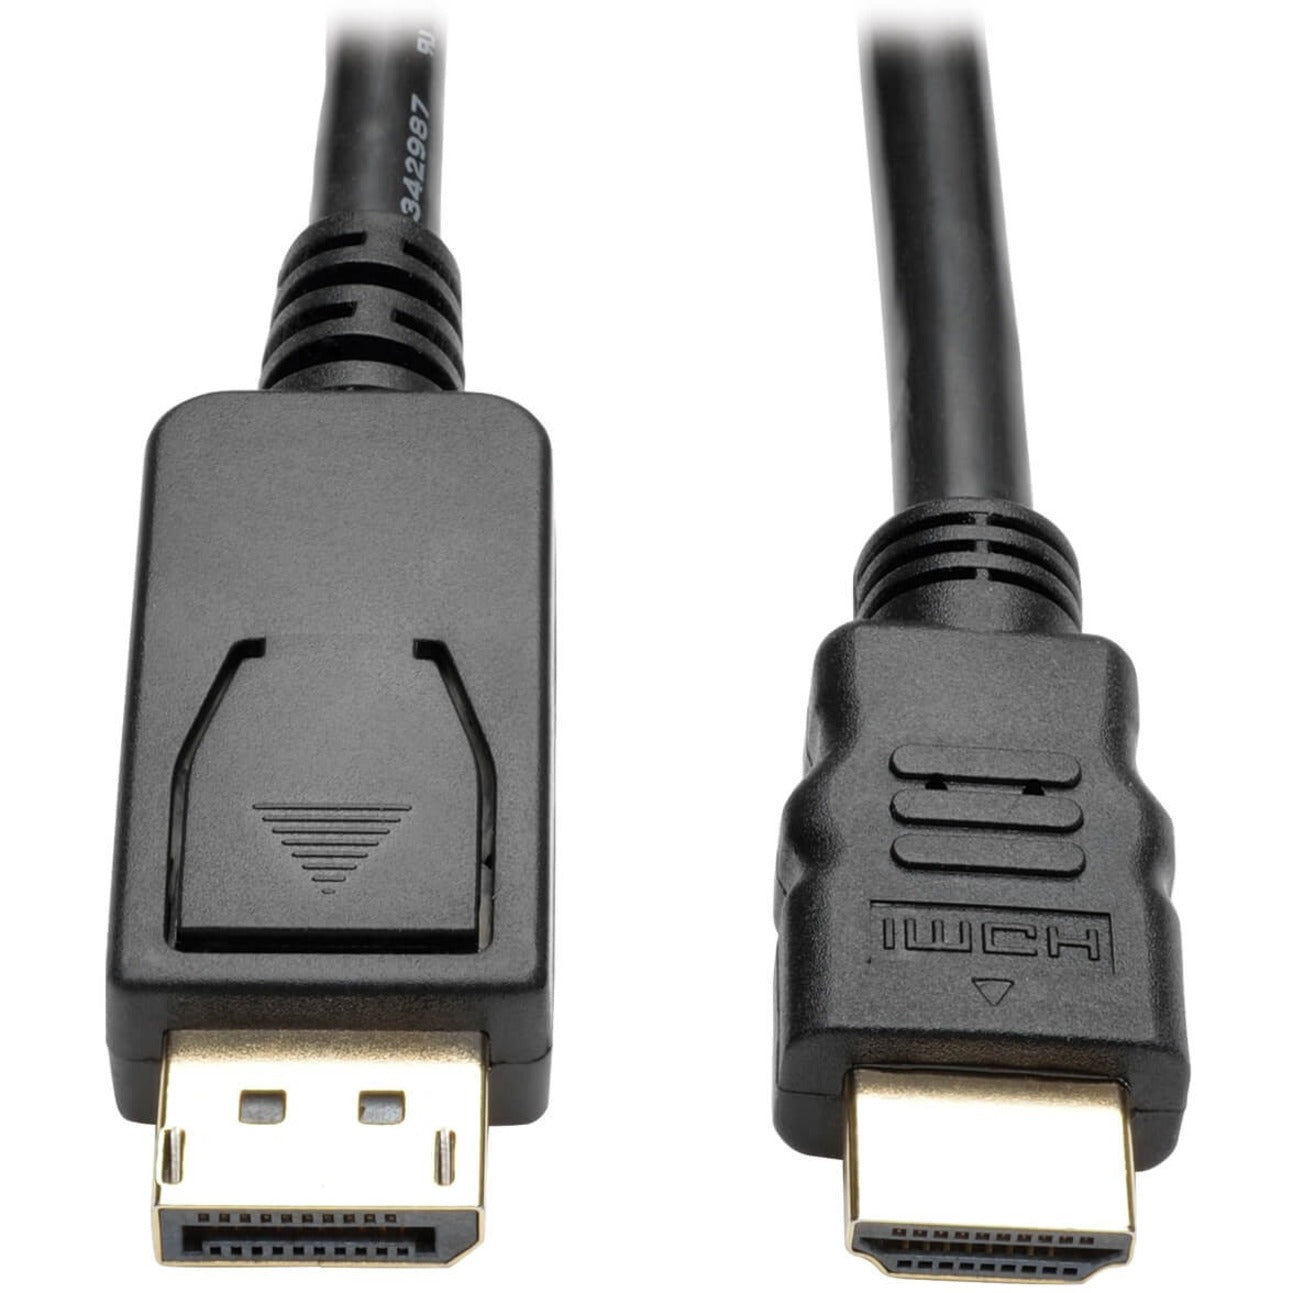 Tripp Lite P582-006-V2 DisplayPort 1.2 to HDMI Adapter Cable 6 ft. UHD Gold-Plated Connectors Black